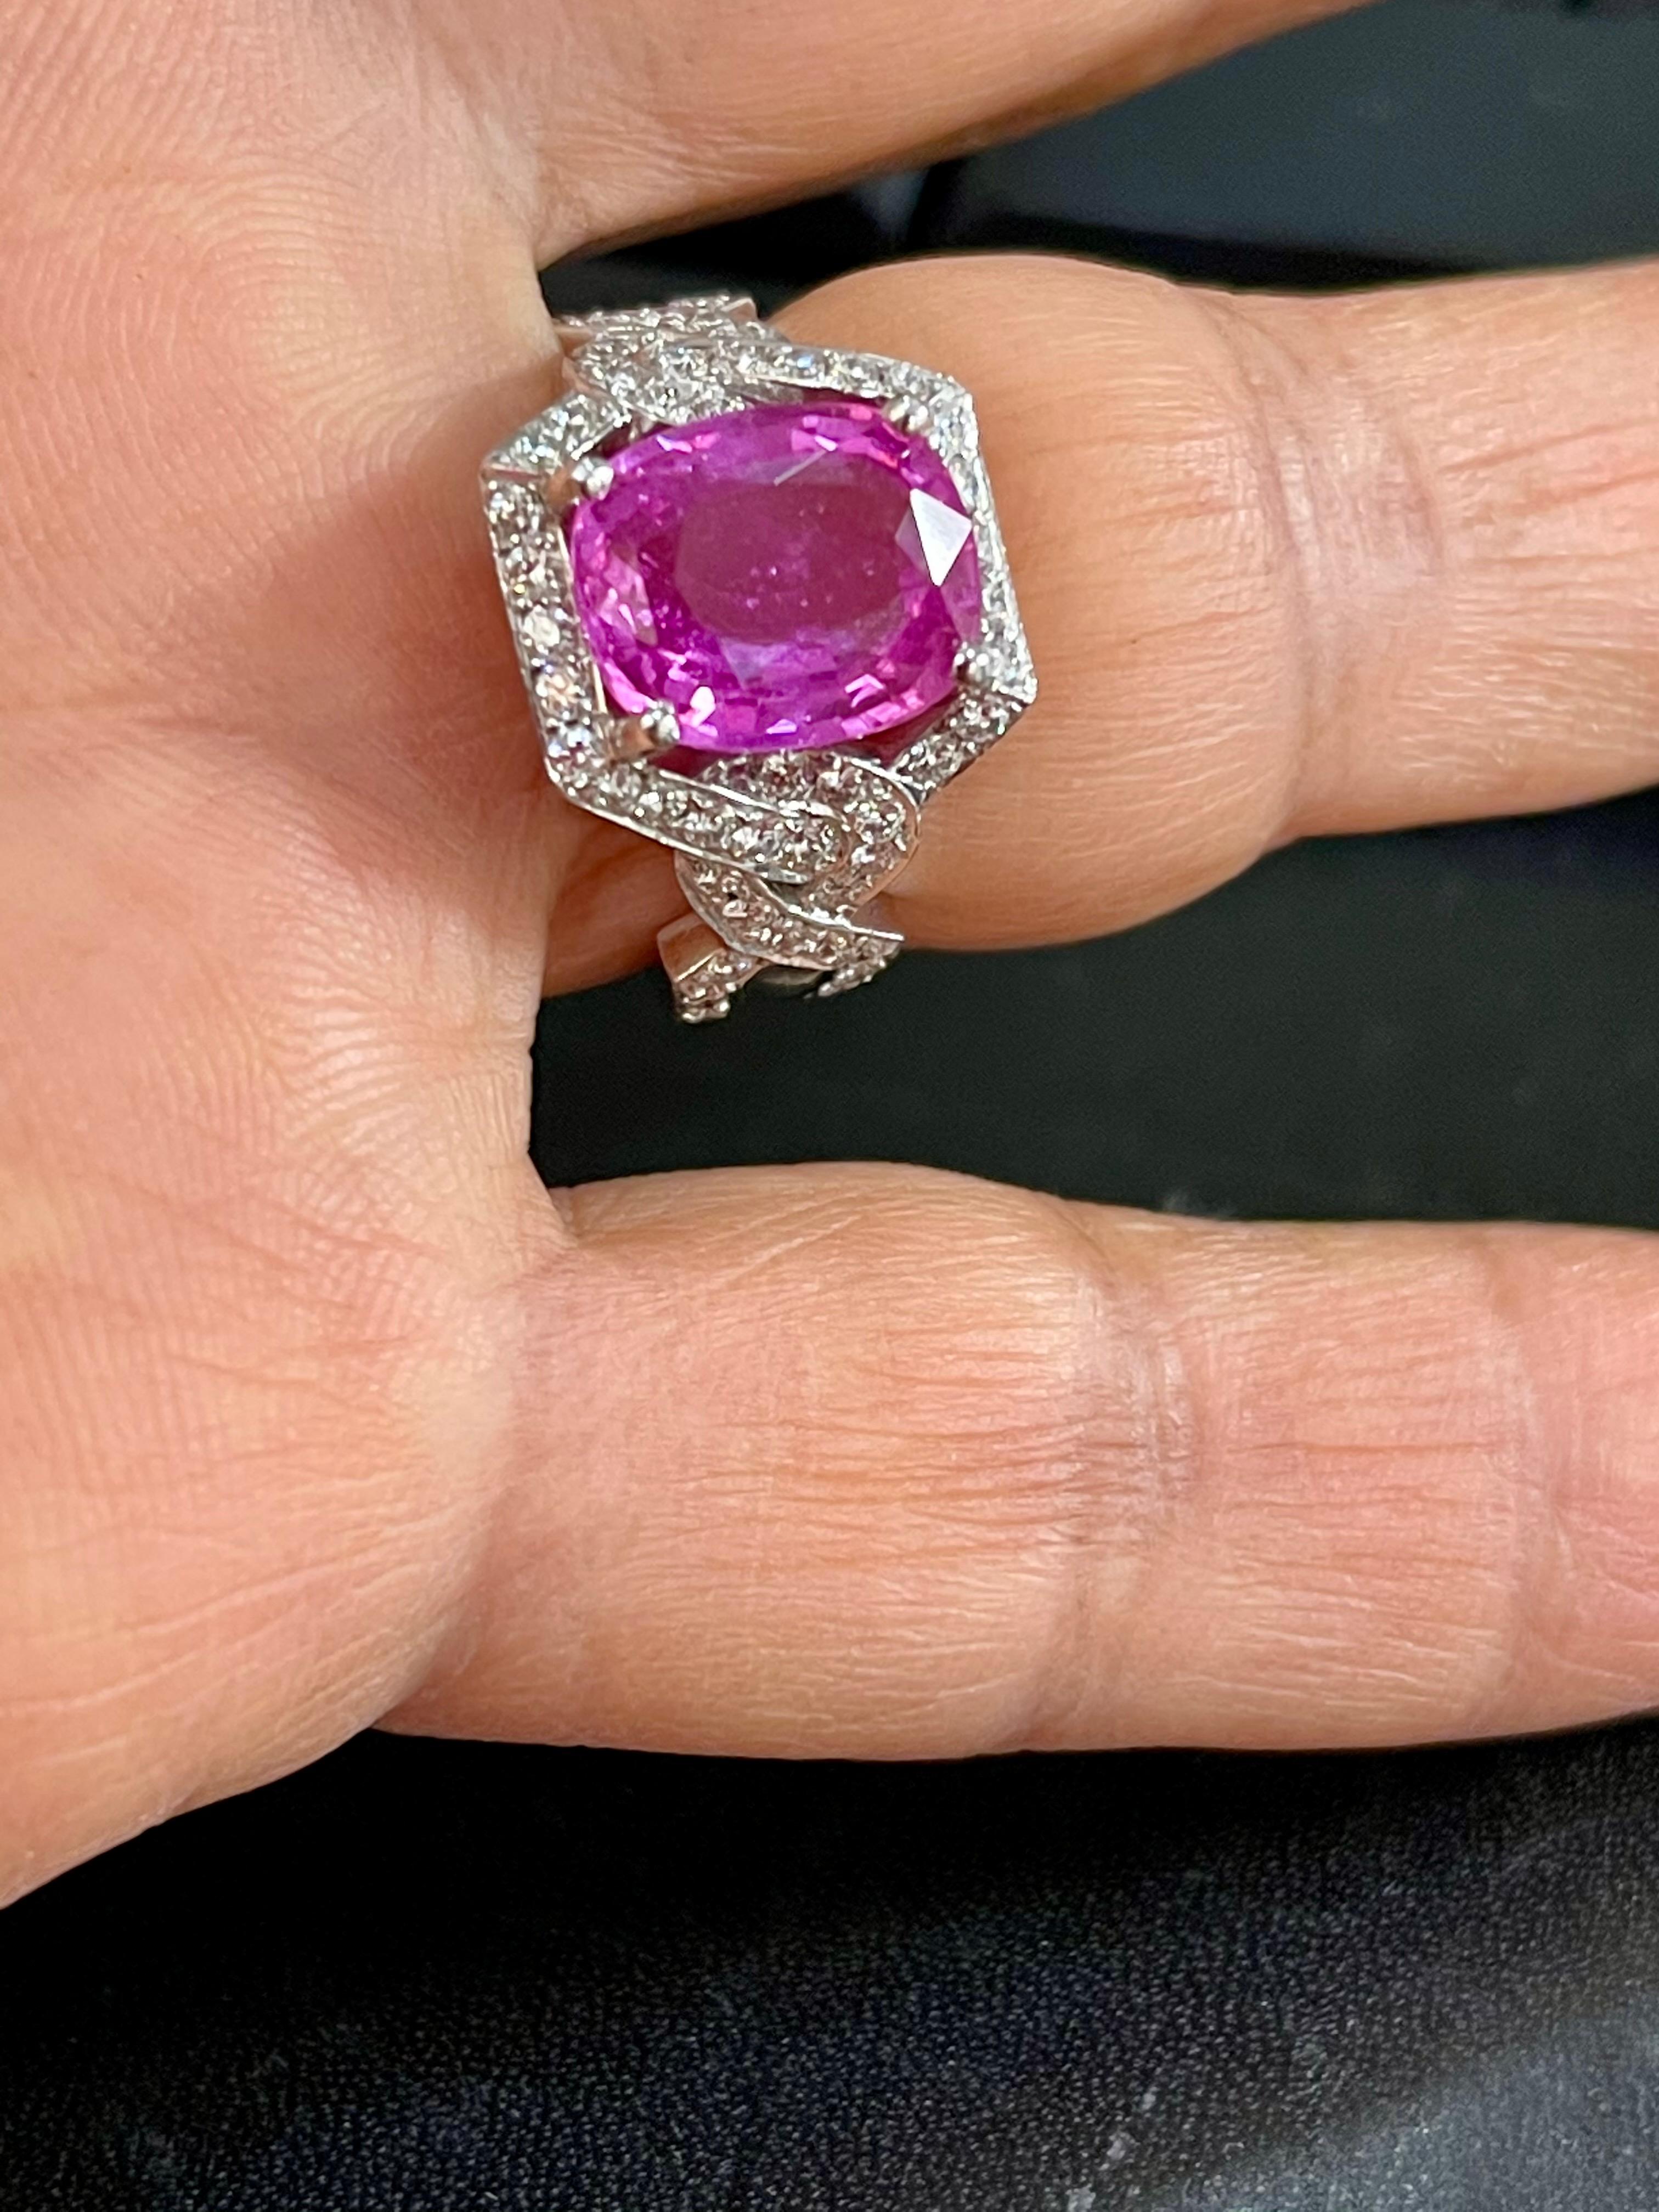 A classic, Ring 
Exact weight of 4.76 Ct natural Pink sapphire and 1.2 ct  Round  Diamond 18 Karat  White gold   Ring
 All round brilliant cut diamonds, Total diamonds 1.2 ct
Natural Pink Sapphire in  cushion shape , Pretty color, luster is amazing